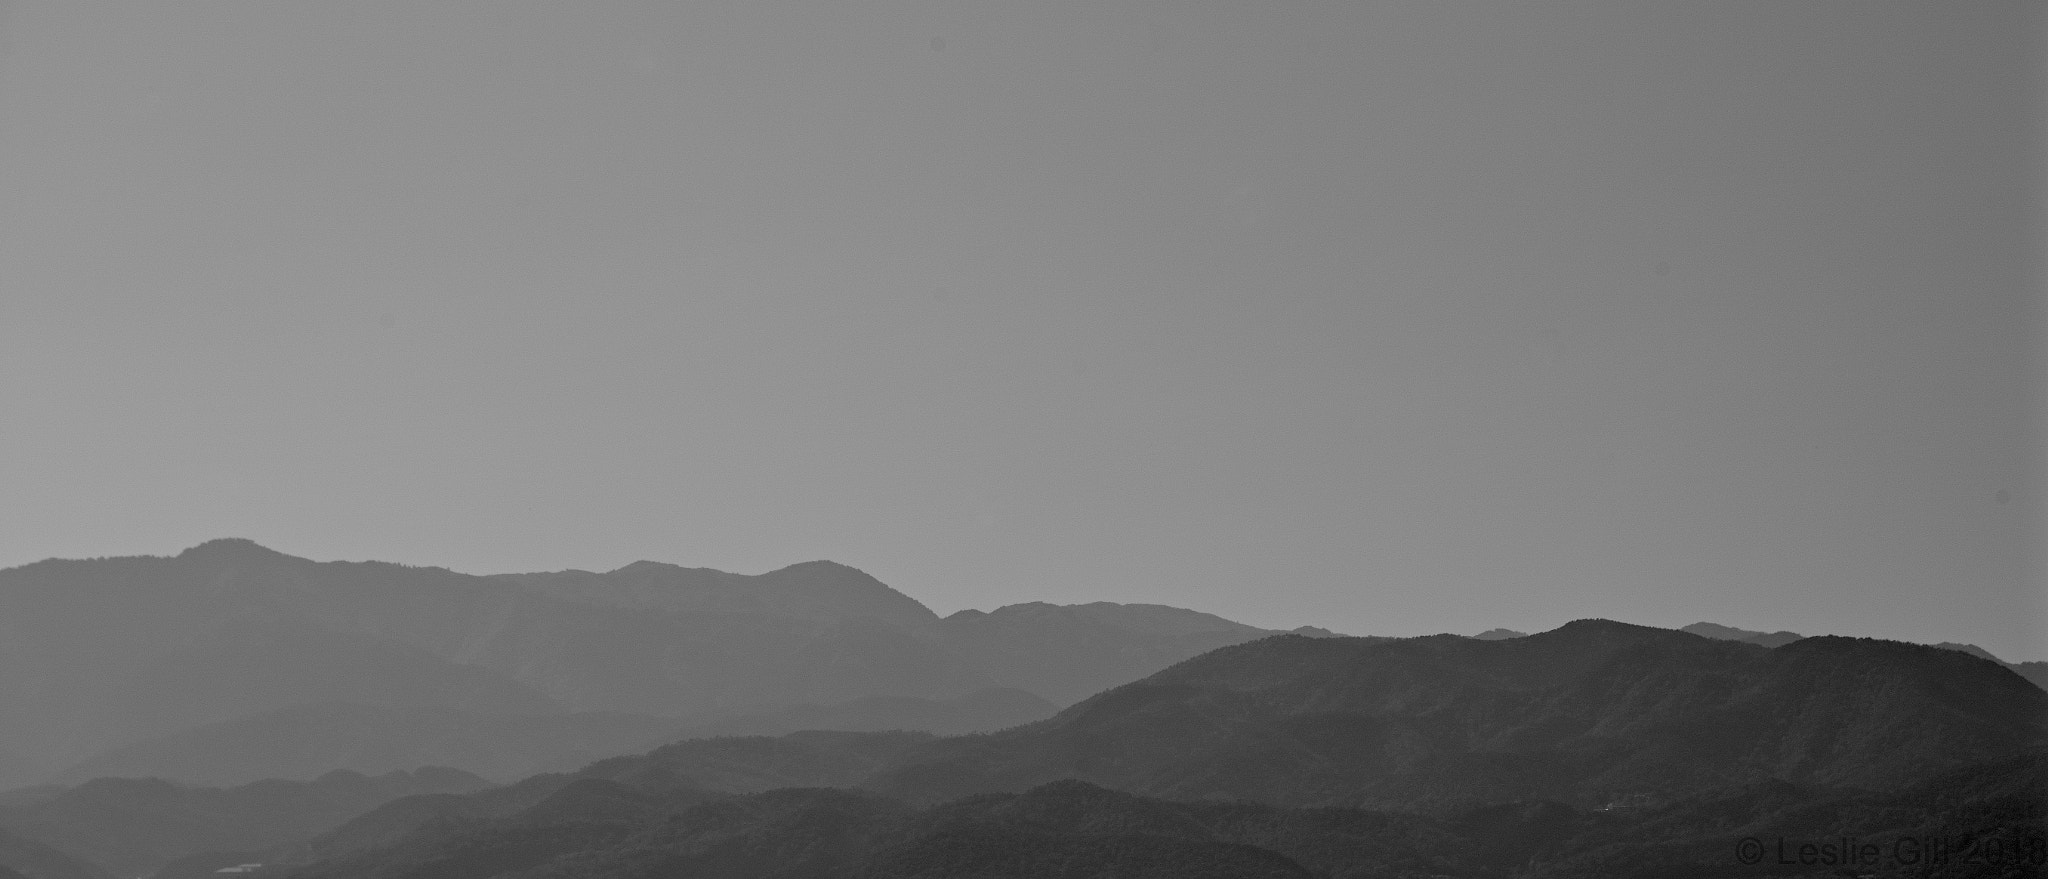 Sigma sd Quattro sample photo. Mountains overlooking kyoto photography